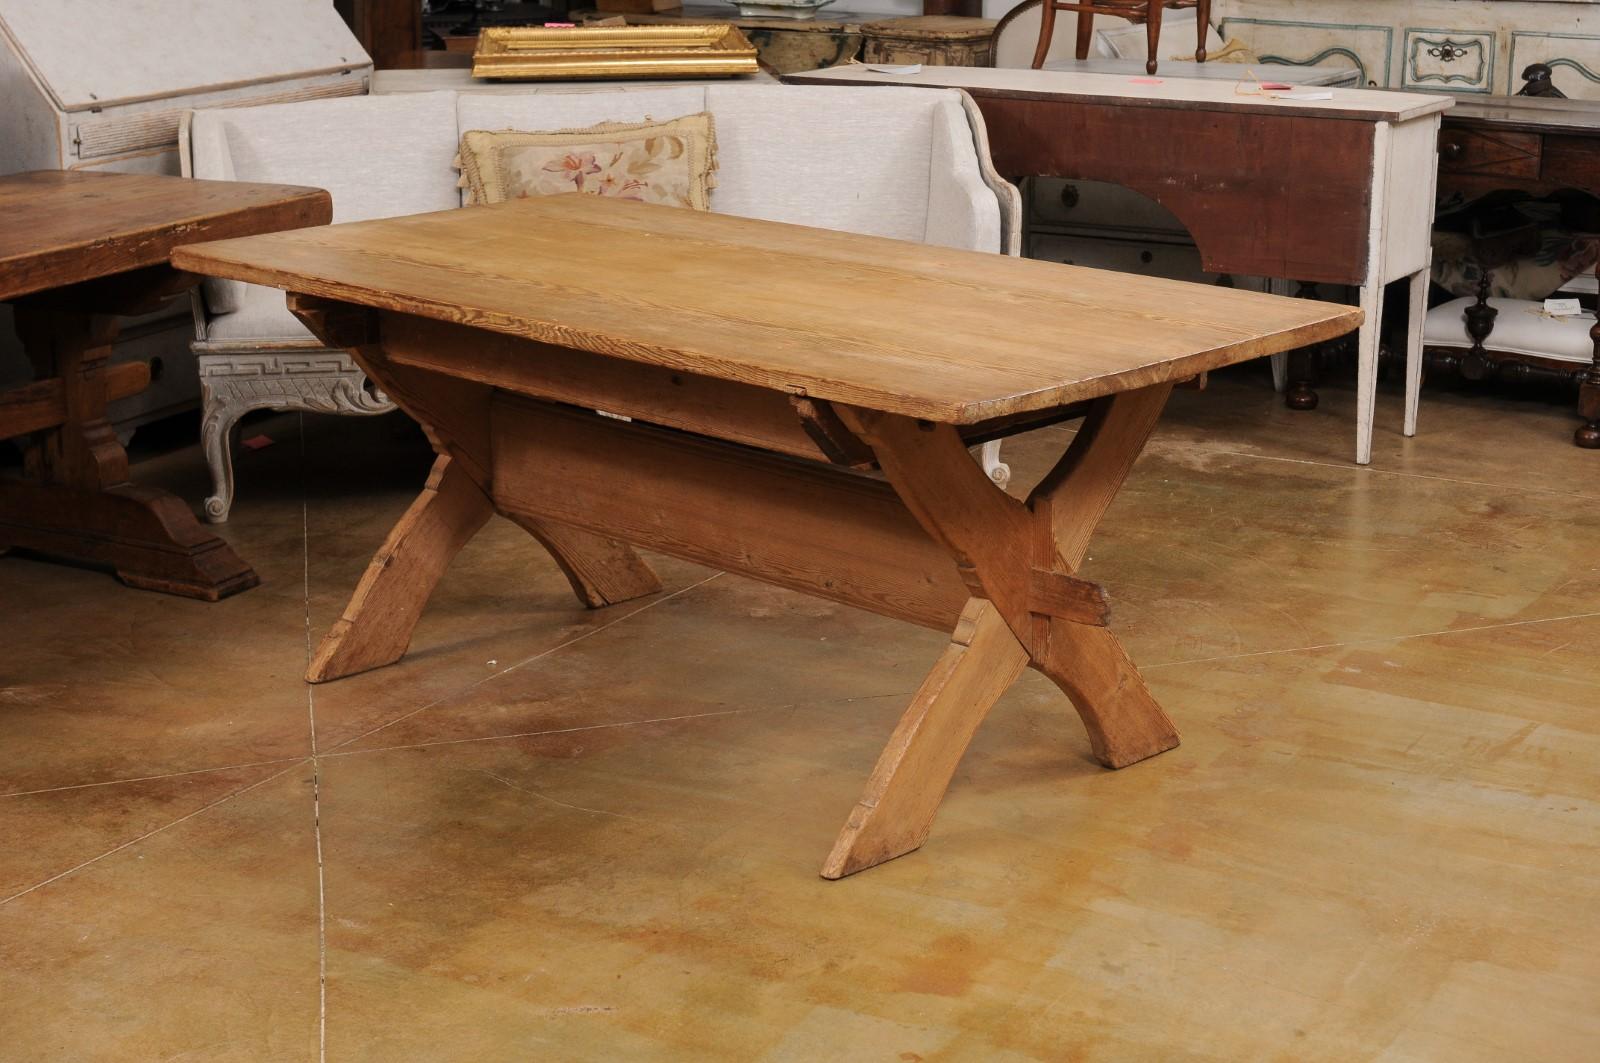 Swedish 1790s European Pine Sawbuck Table with Drawer and Double X-Form Legs For Sale 1